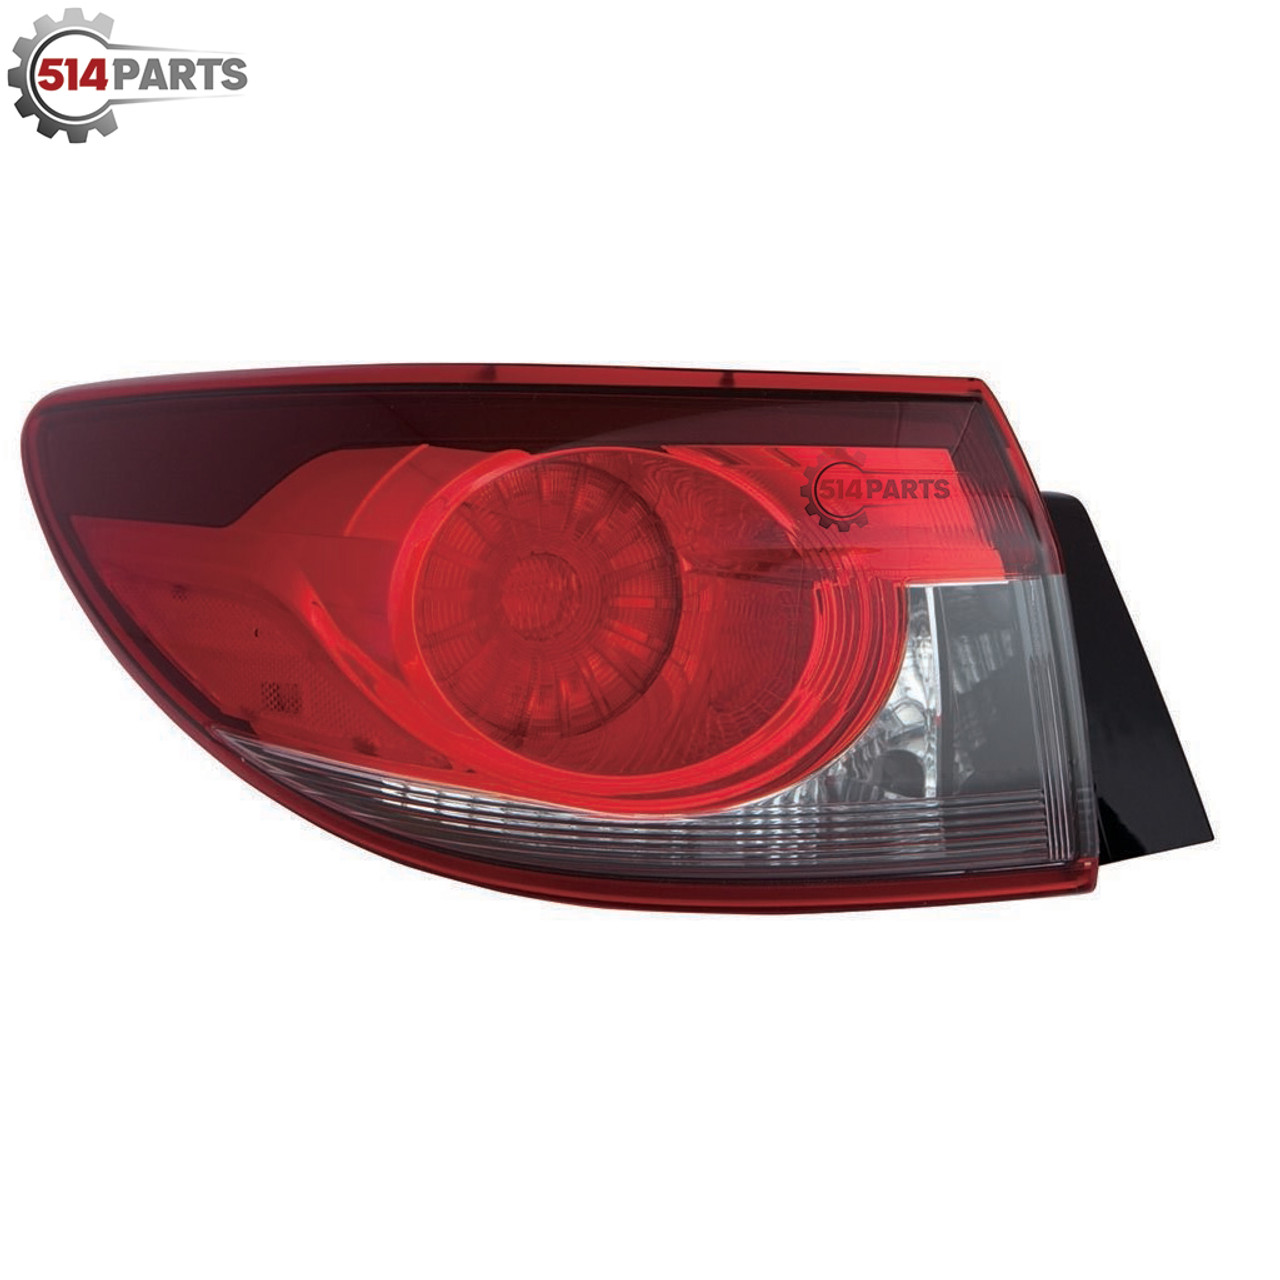 2014 - 2017 MAZDA 6 TAIL LIGHTS High Quality - PHARES ARRIERE Haute Qualite